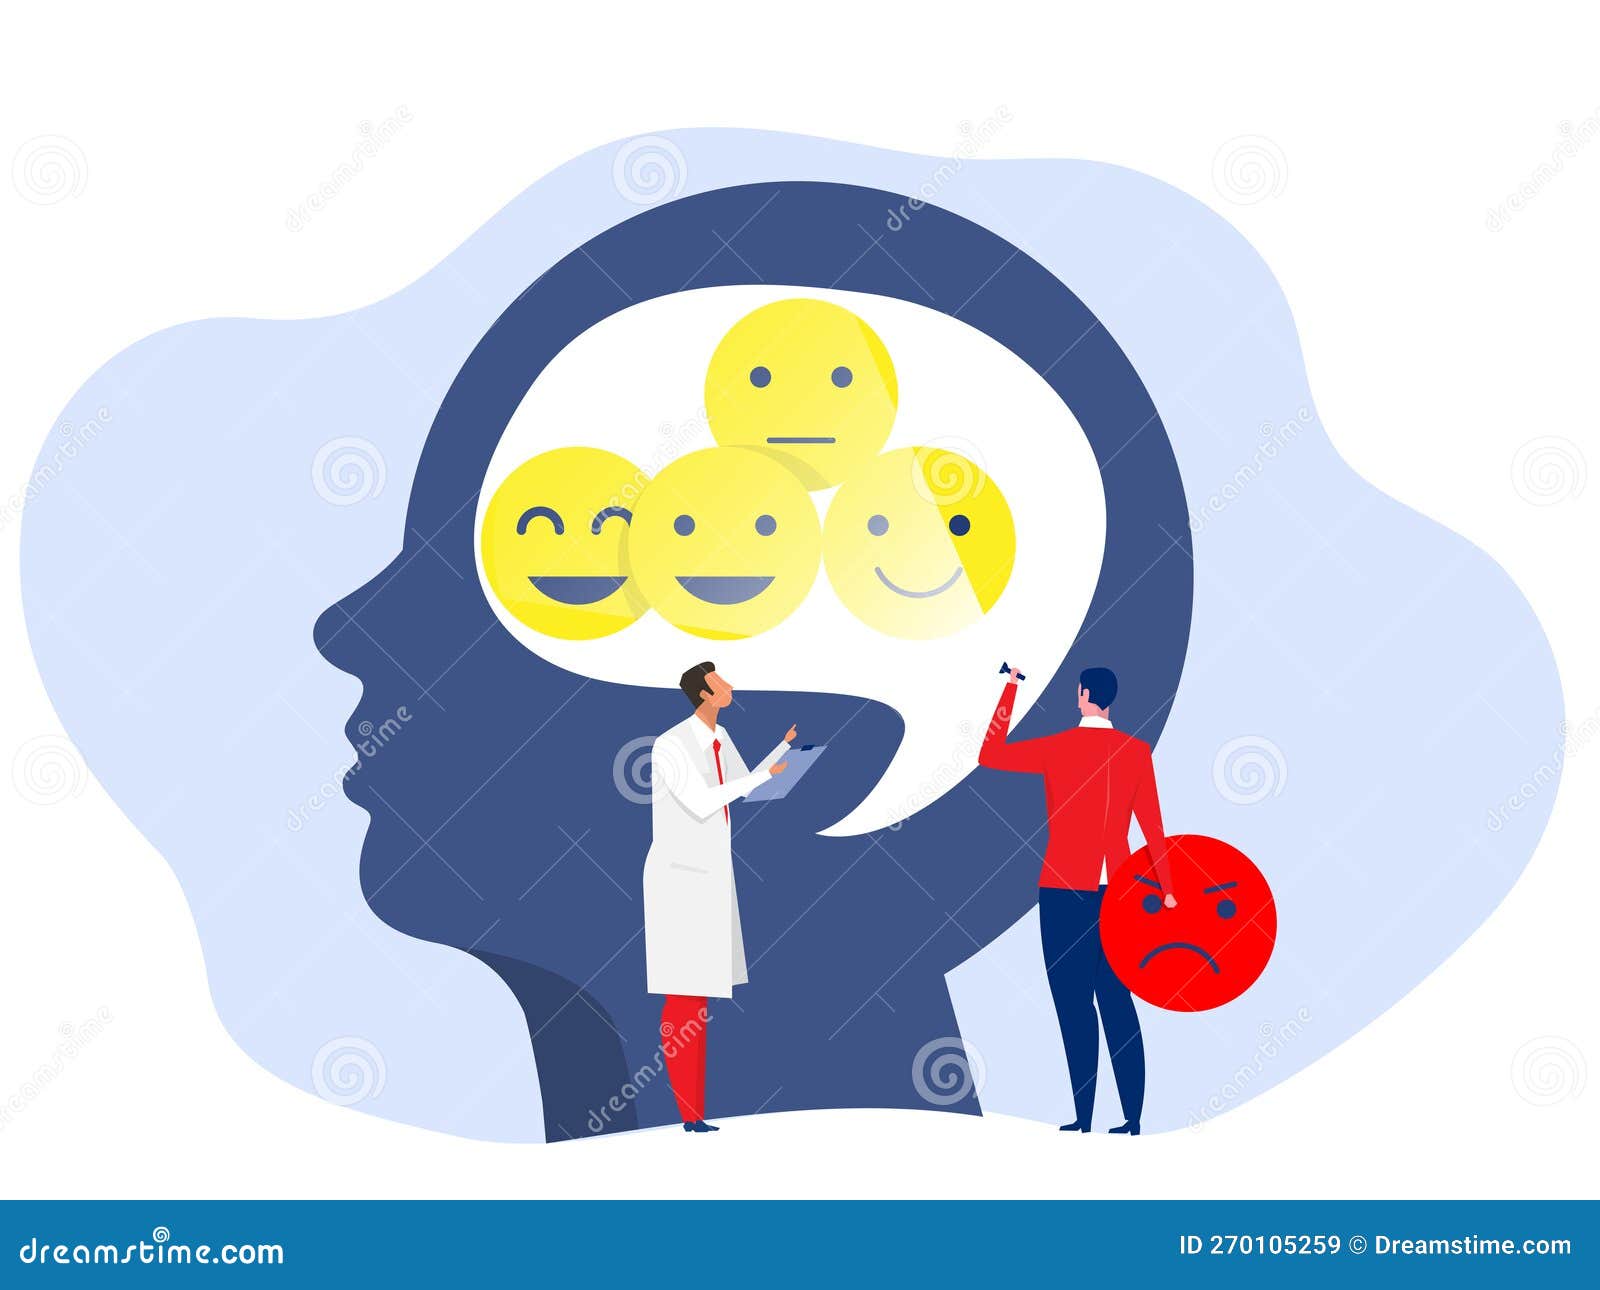 https://thumbs.dreamstime.com/z/businessman-take-out-face-negative-head-except-positive-thinking-reaction-concept-vector-270105259.jpg